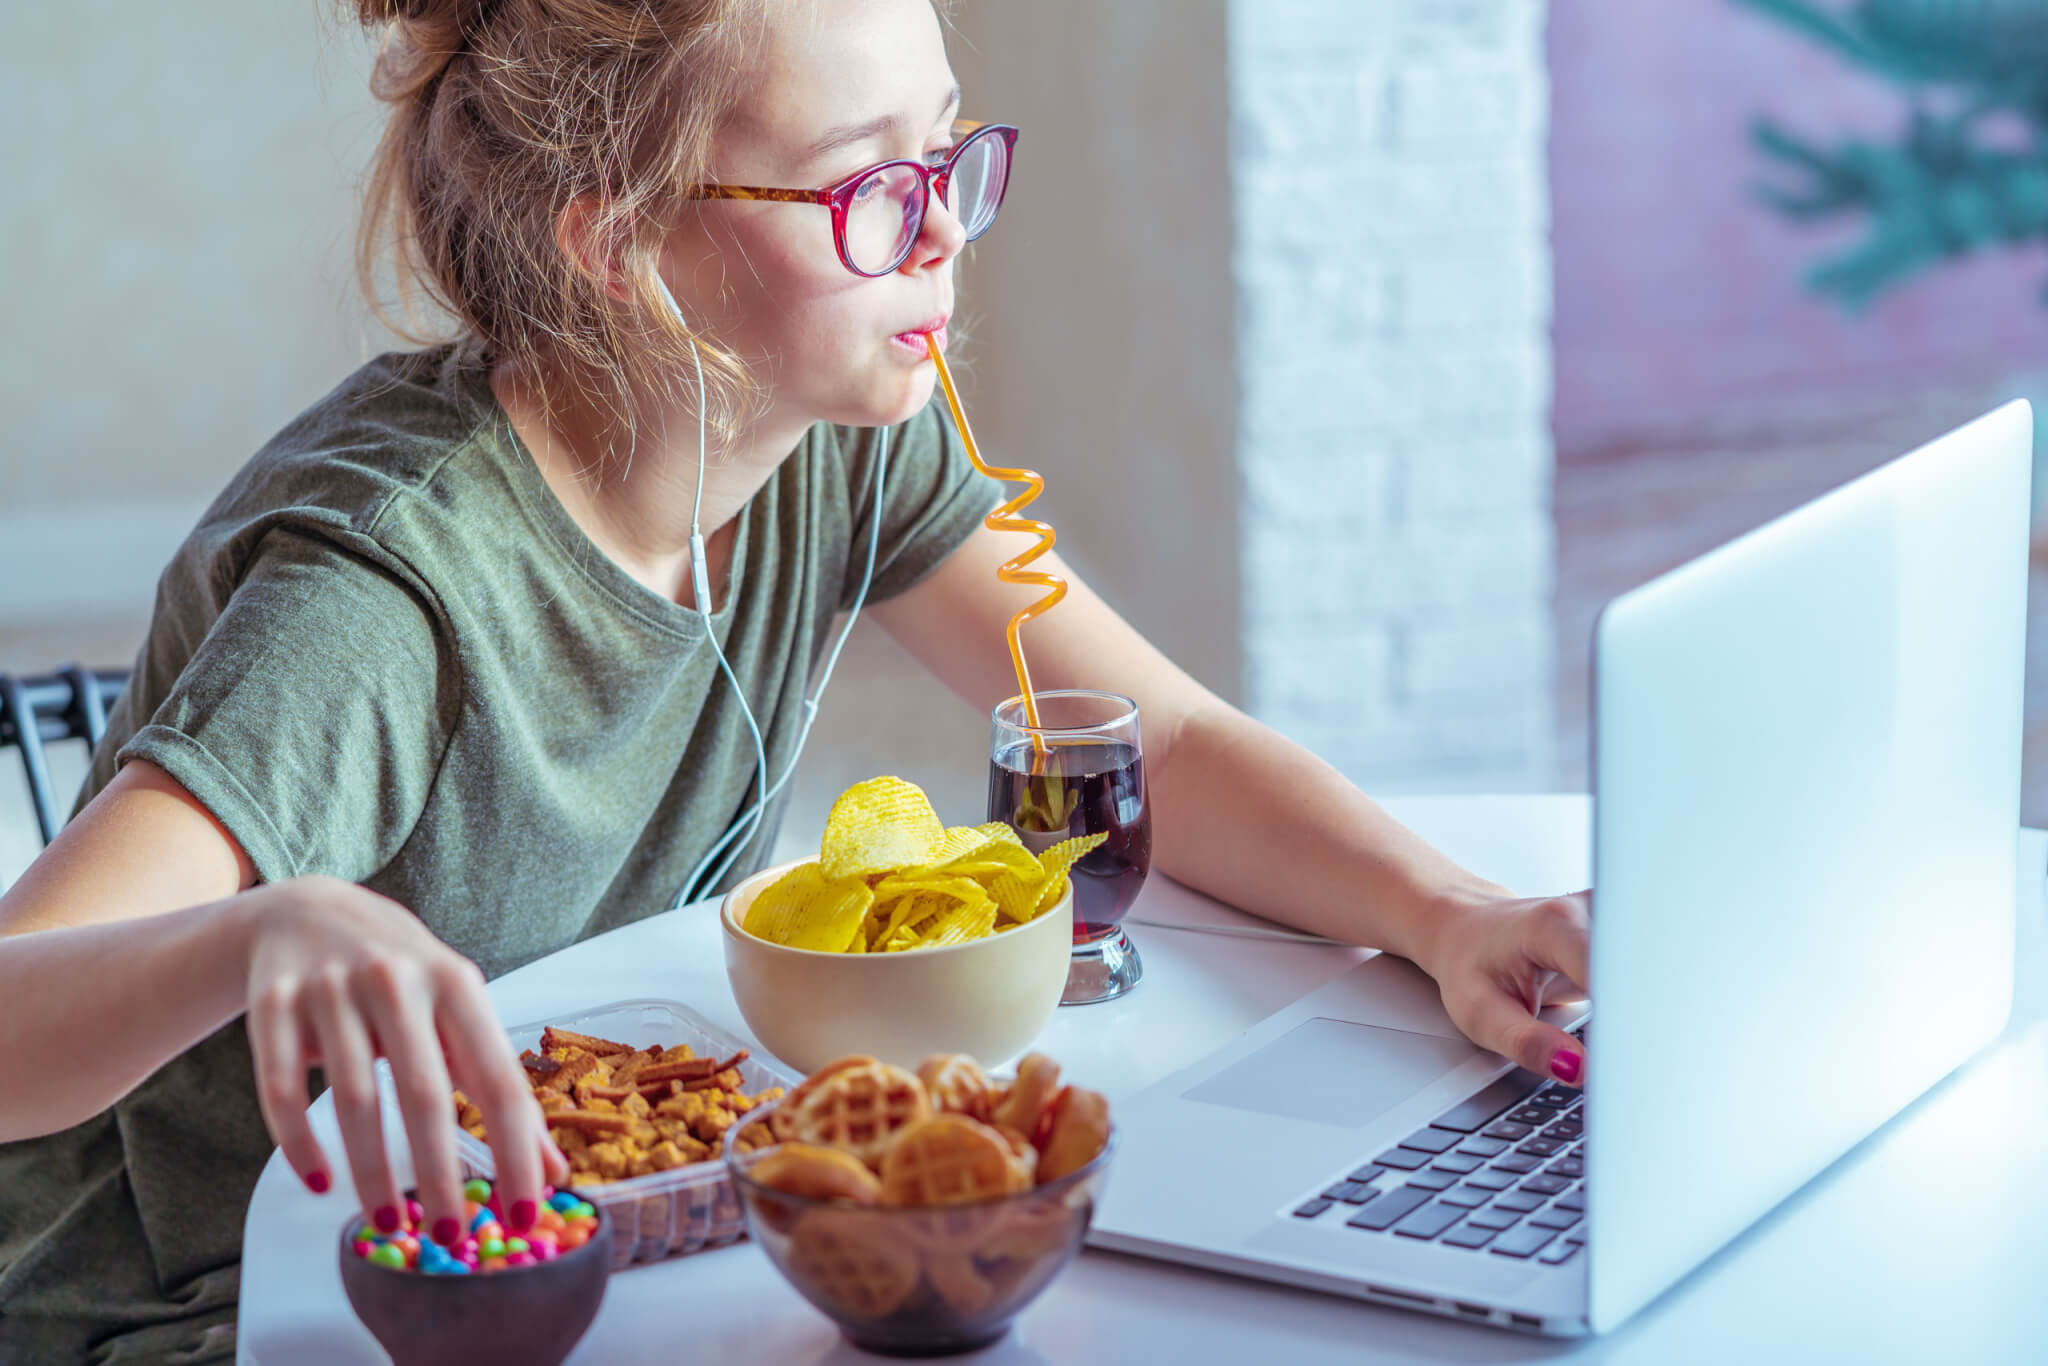 Woman eating snacks and junk food while working at desk